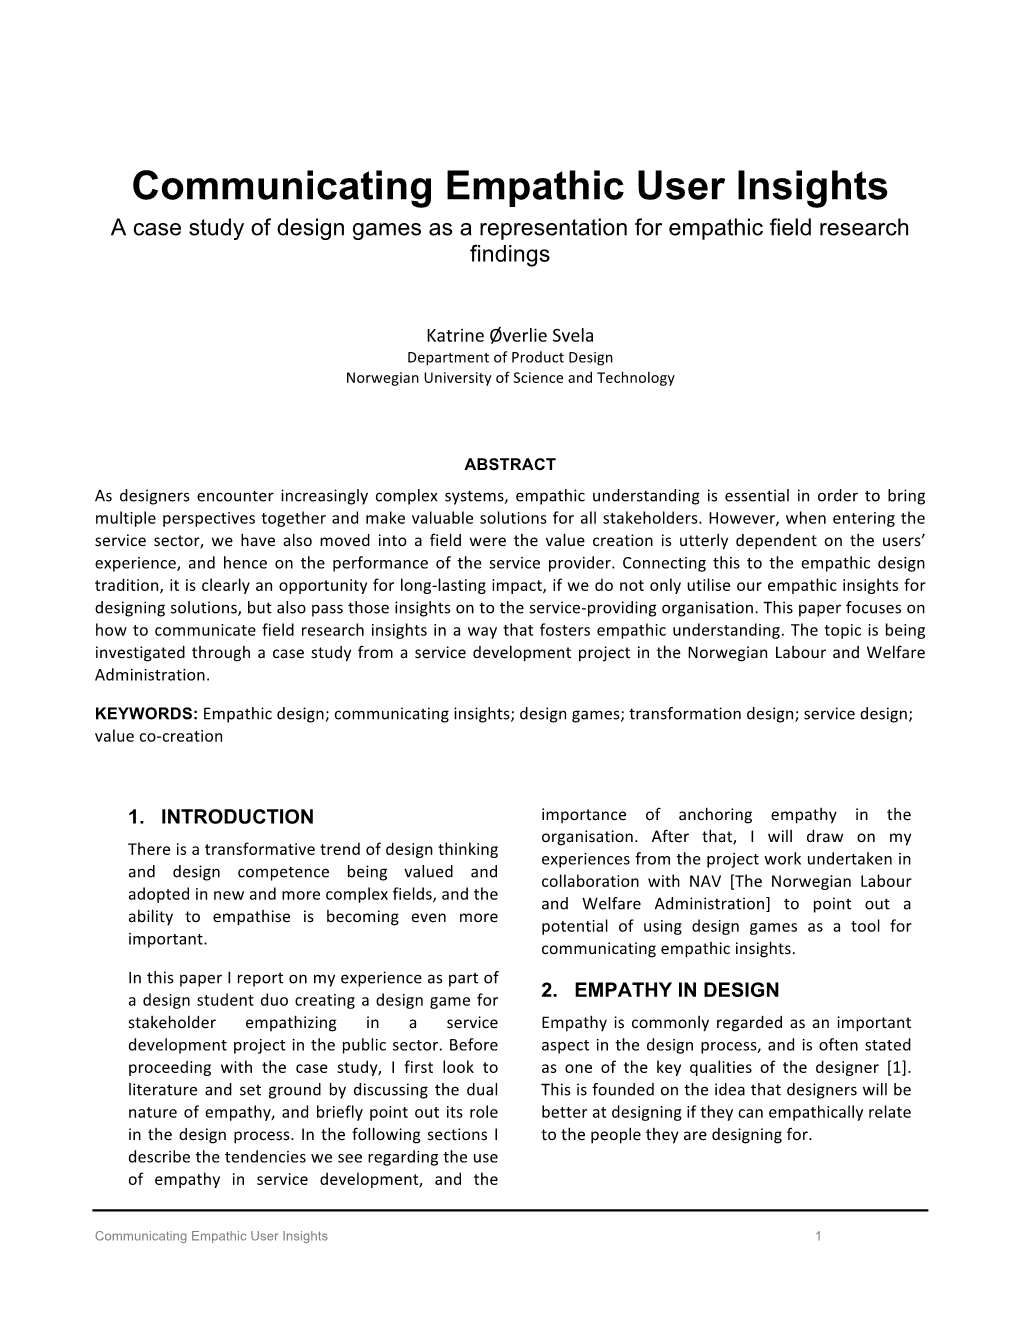 Communicating Empathic User Insights a Case Study of Design Games As a Representation for Empathic Field Research Findings